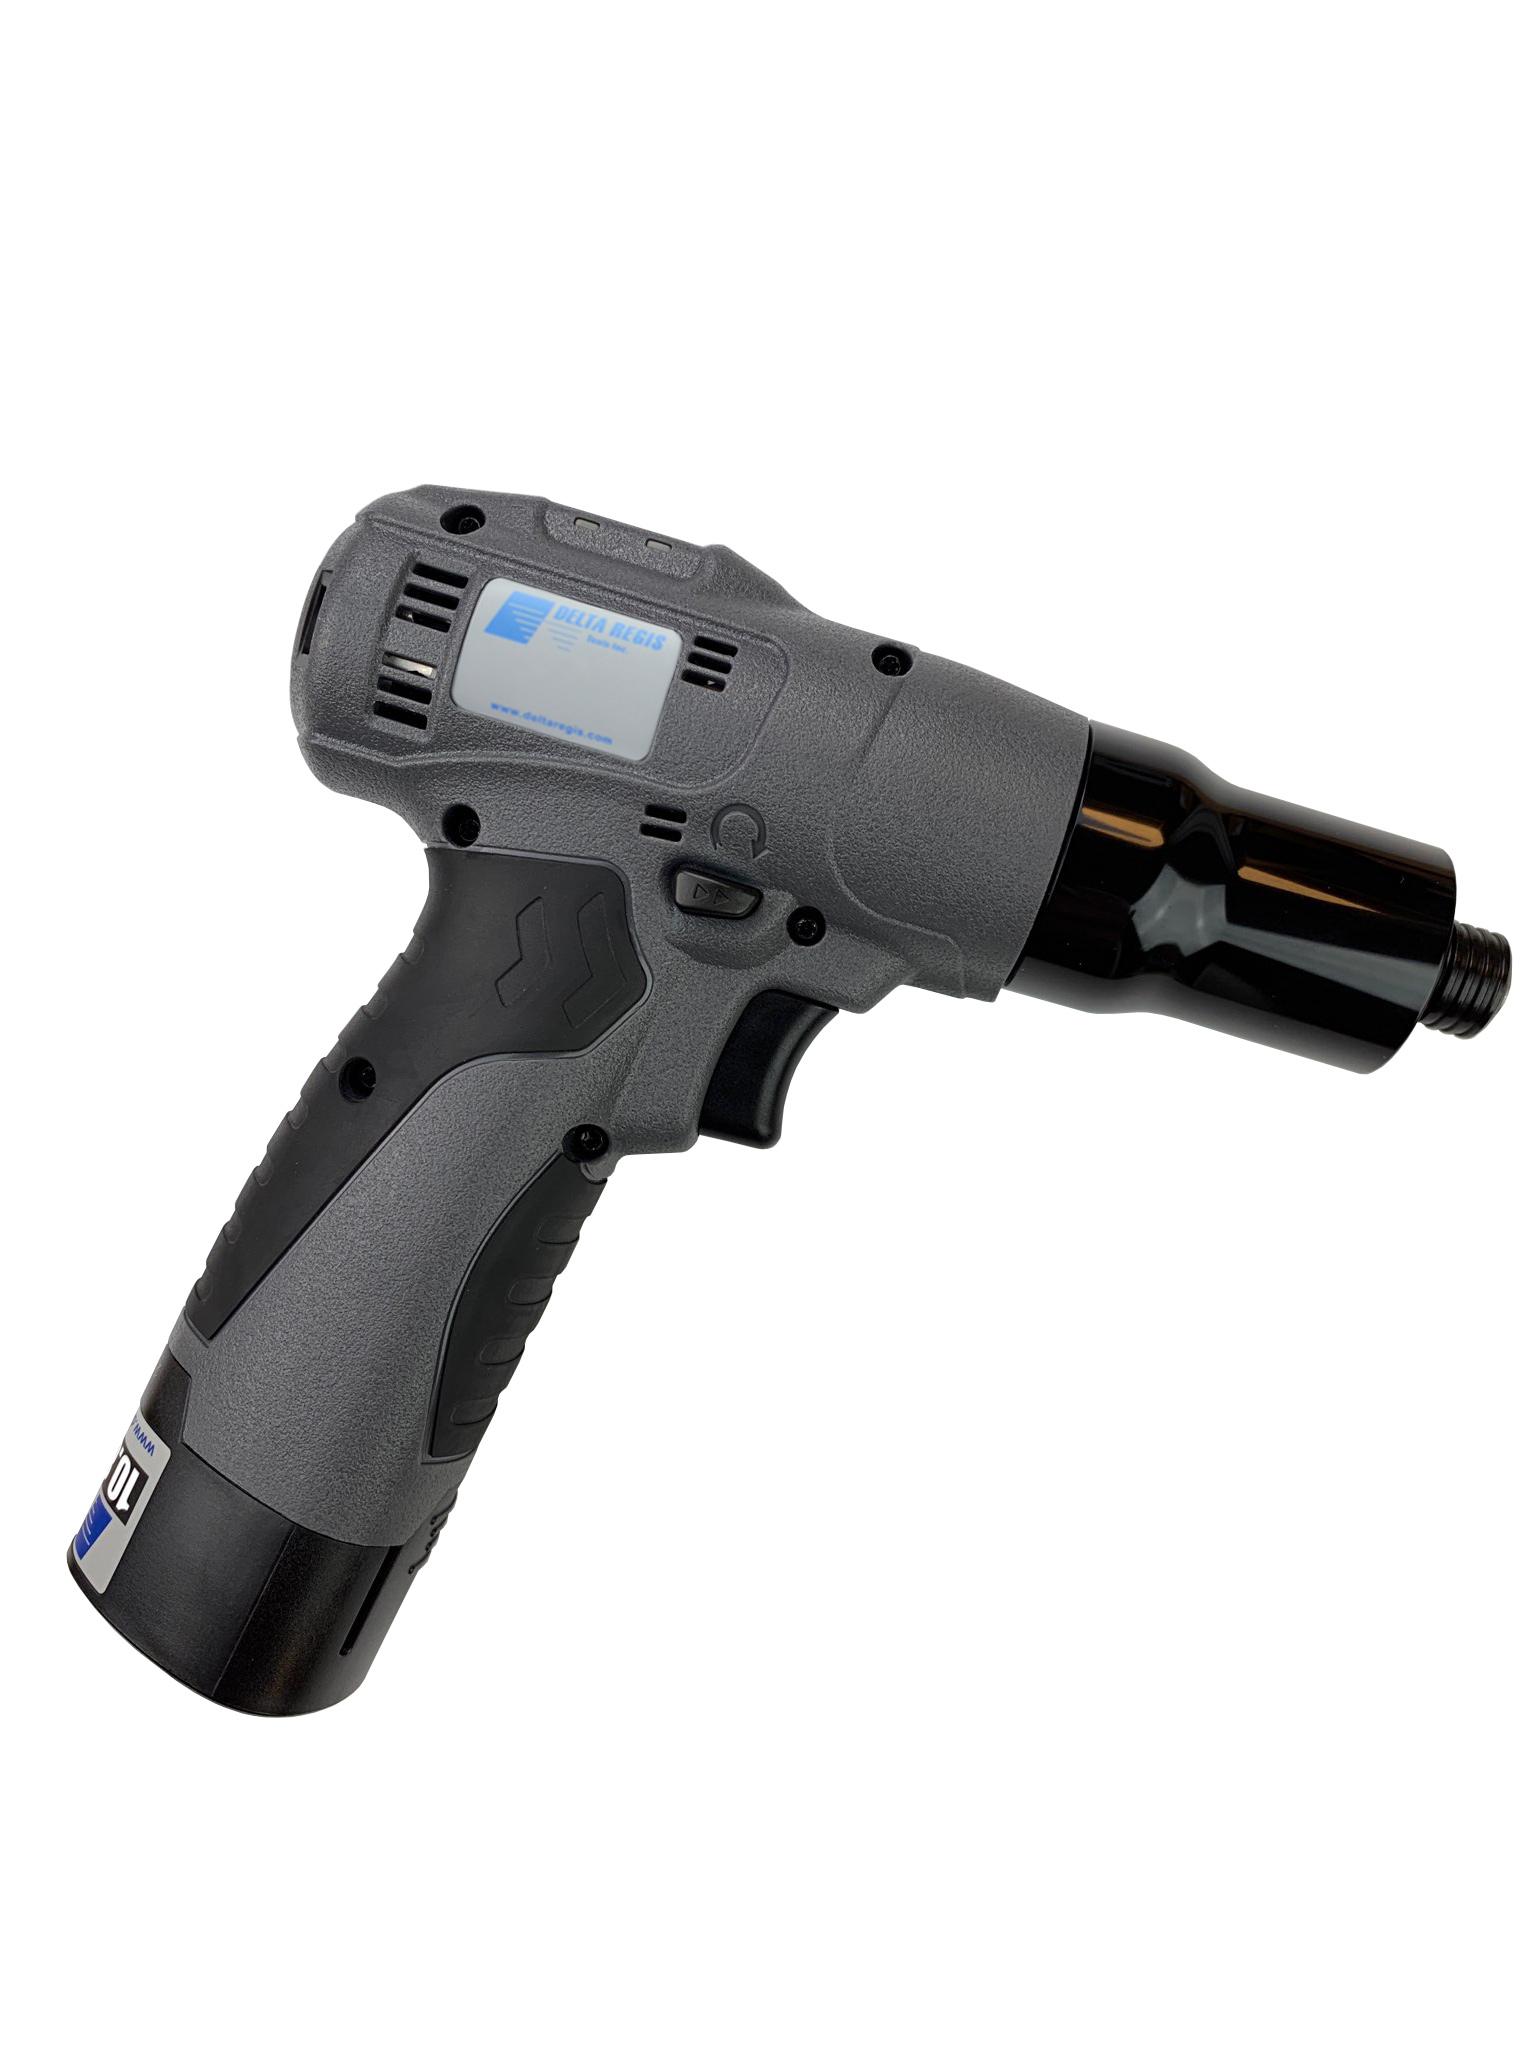 BSP830 Tool OnlyCordless Torque Screwdriver(2-6 Nm)(18-53 in-lbs)